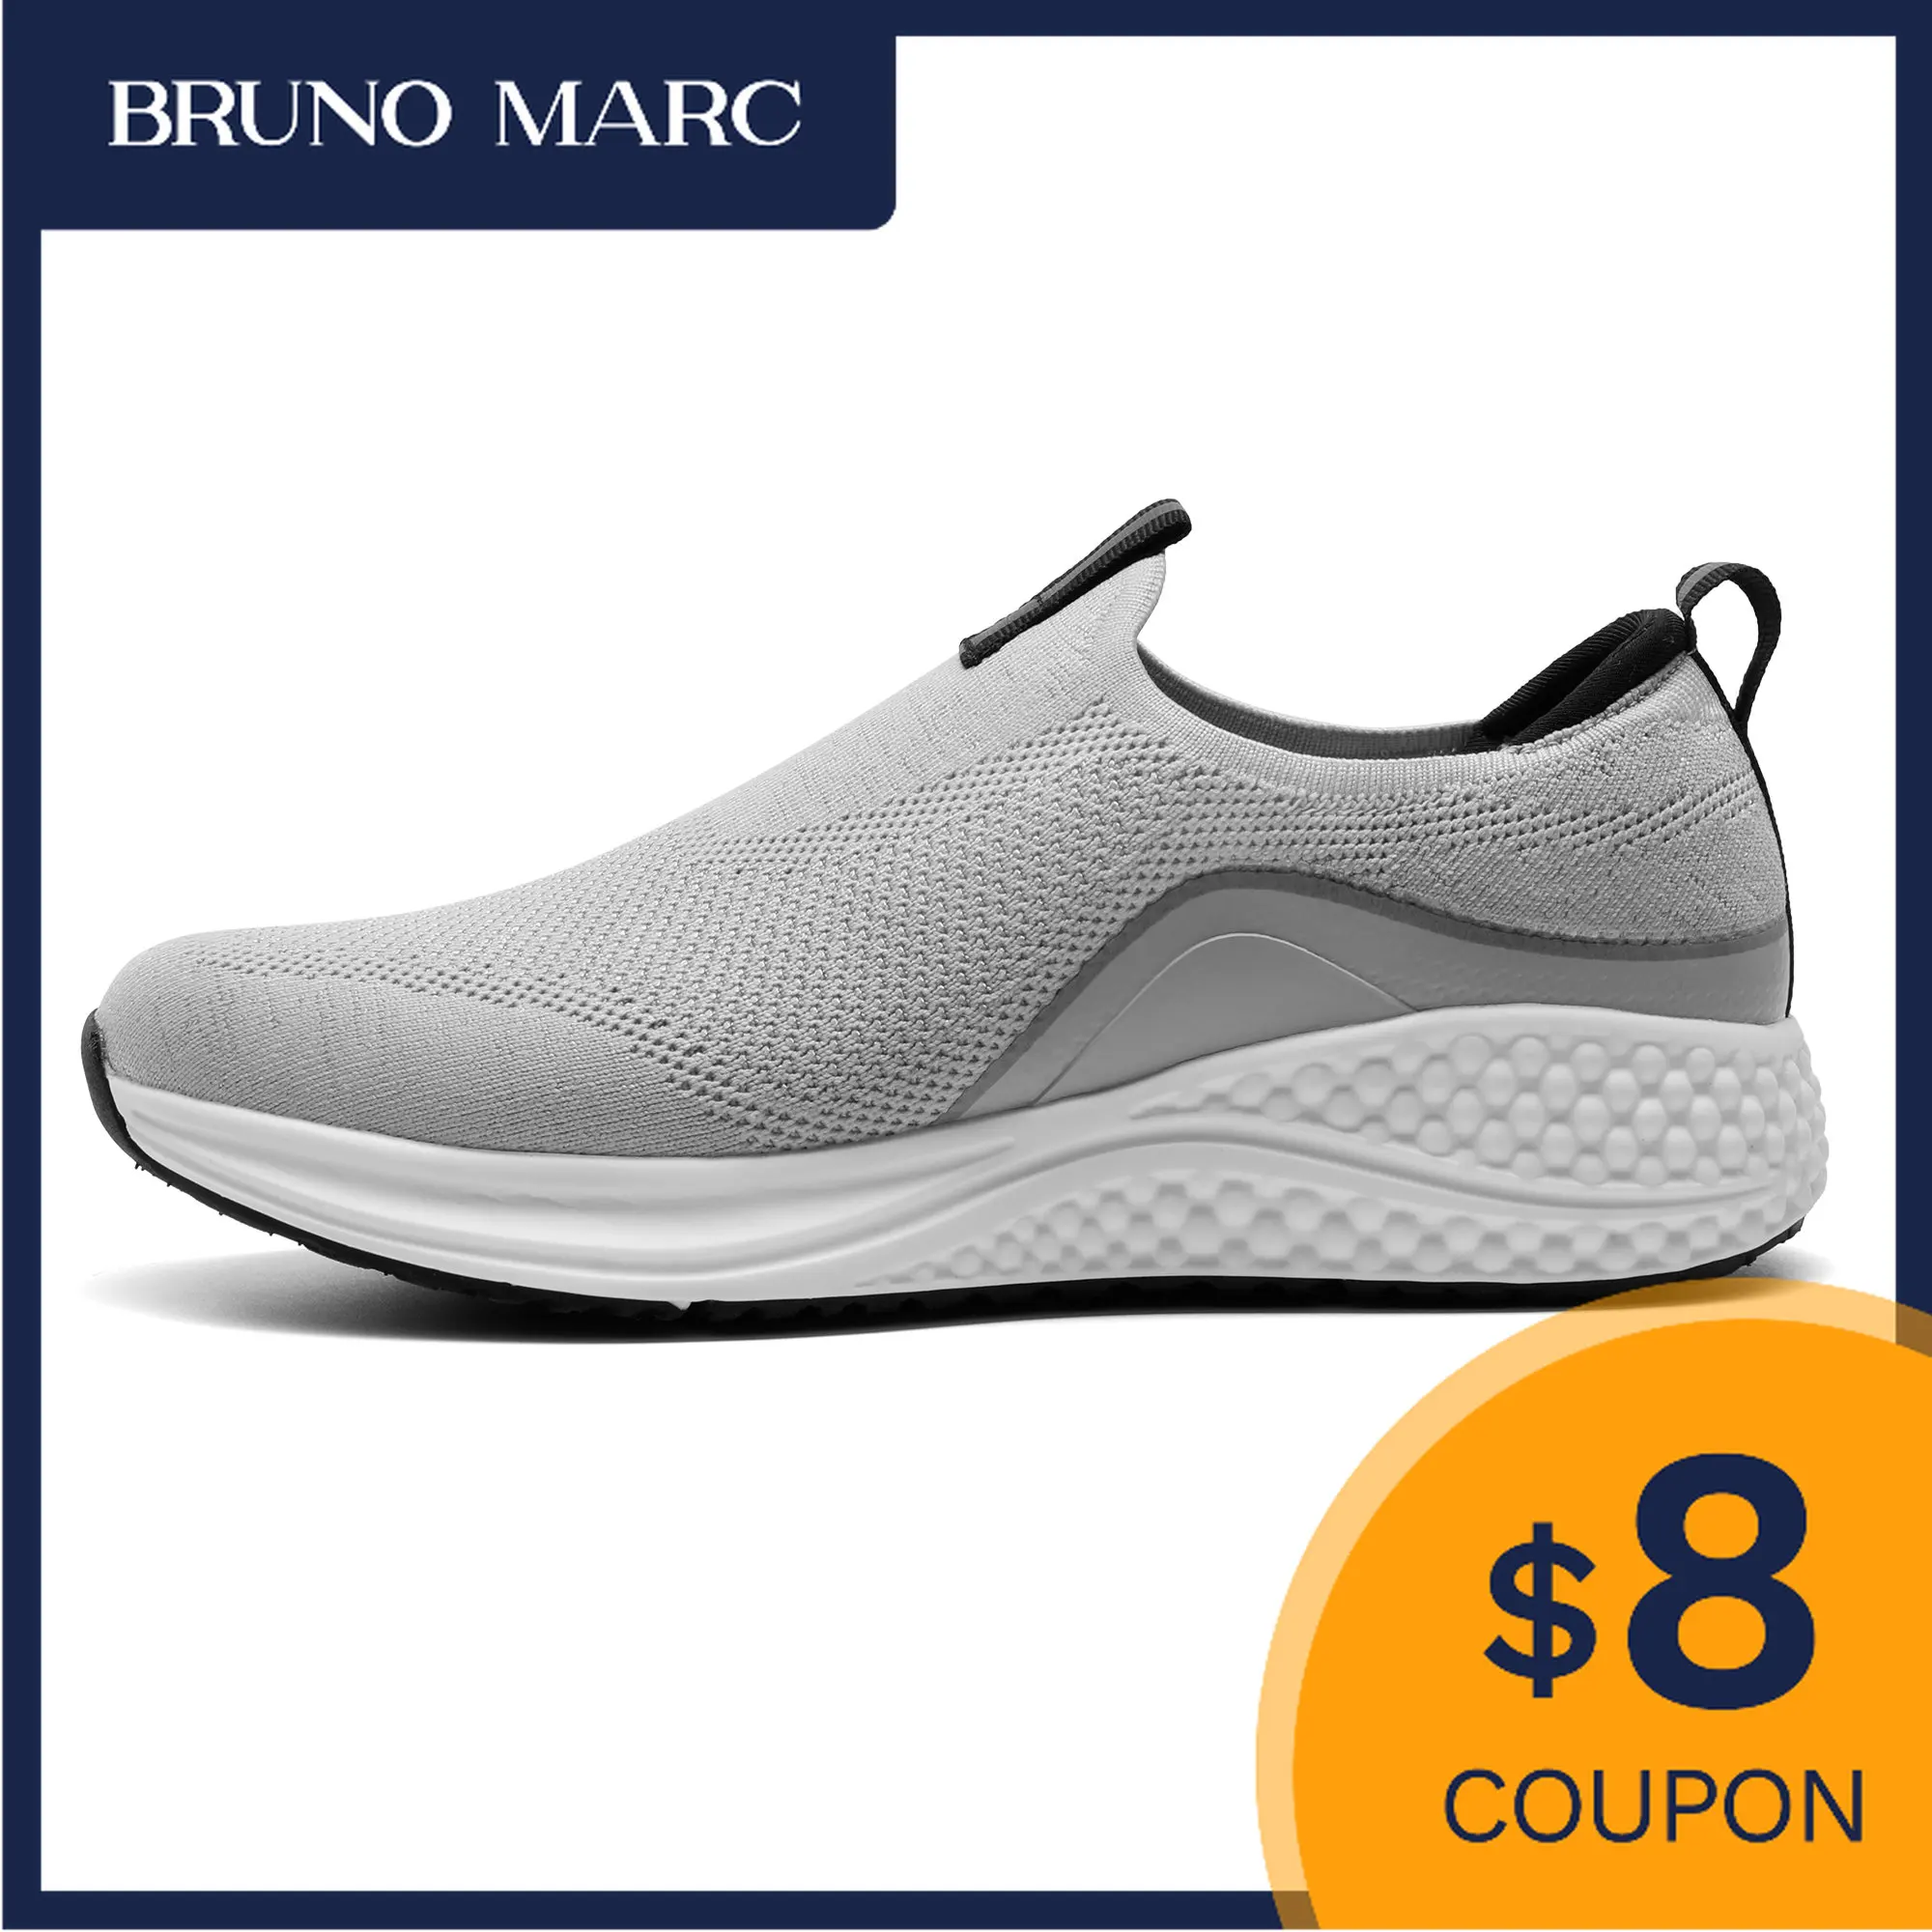 

Bruno Marc Men's Slip-on Sneakers Walking Shoes Casual Loafers Lightweight Breathable Cushion Running Jogging Shoes Breathable